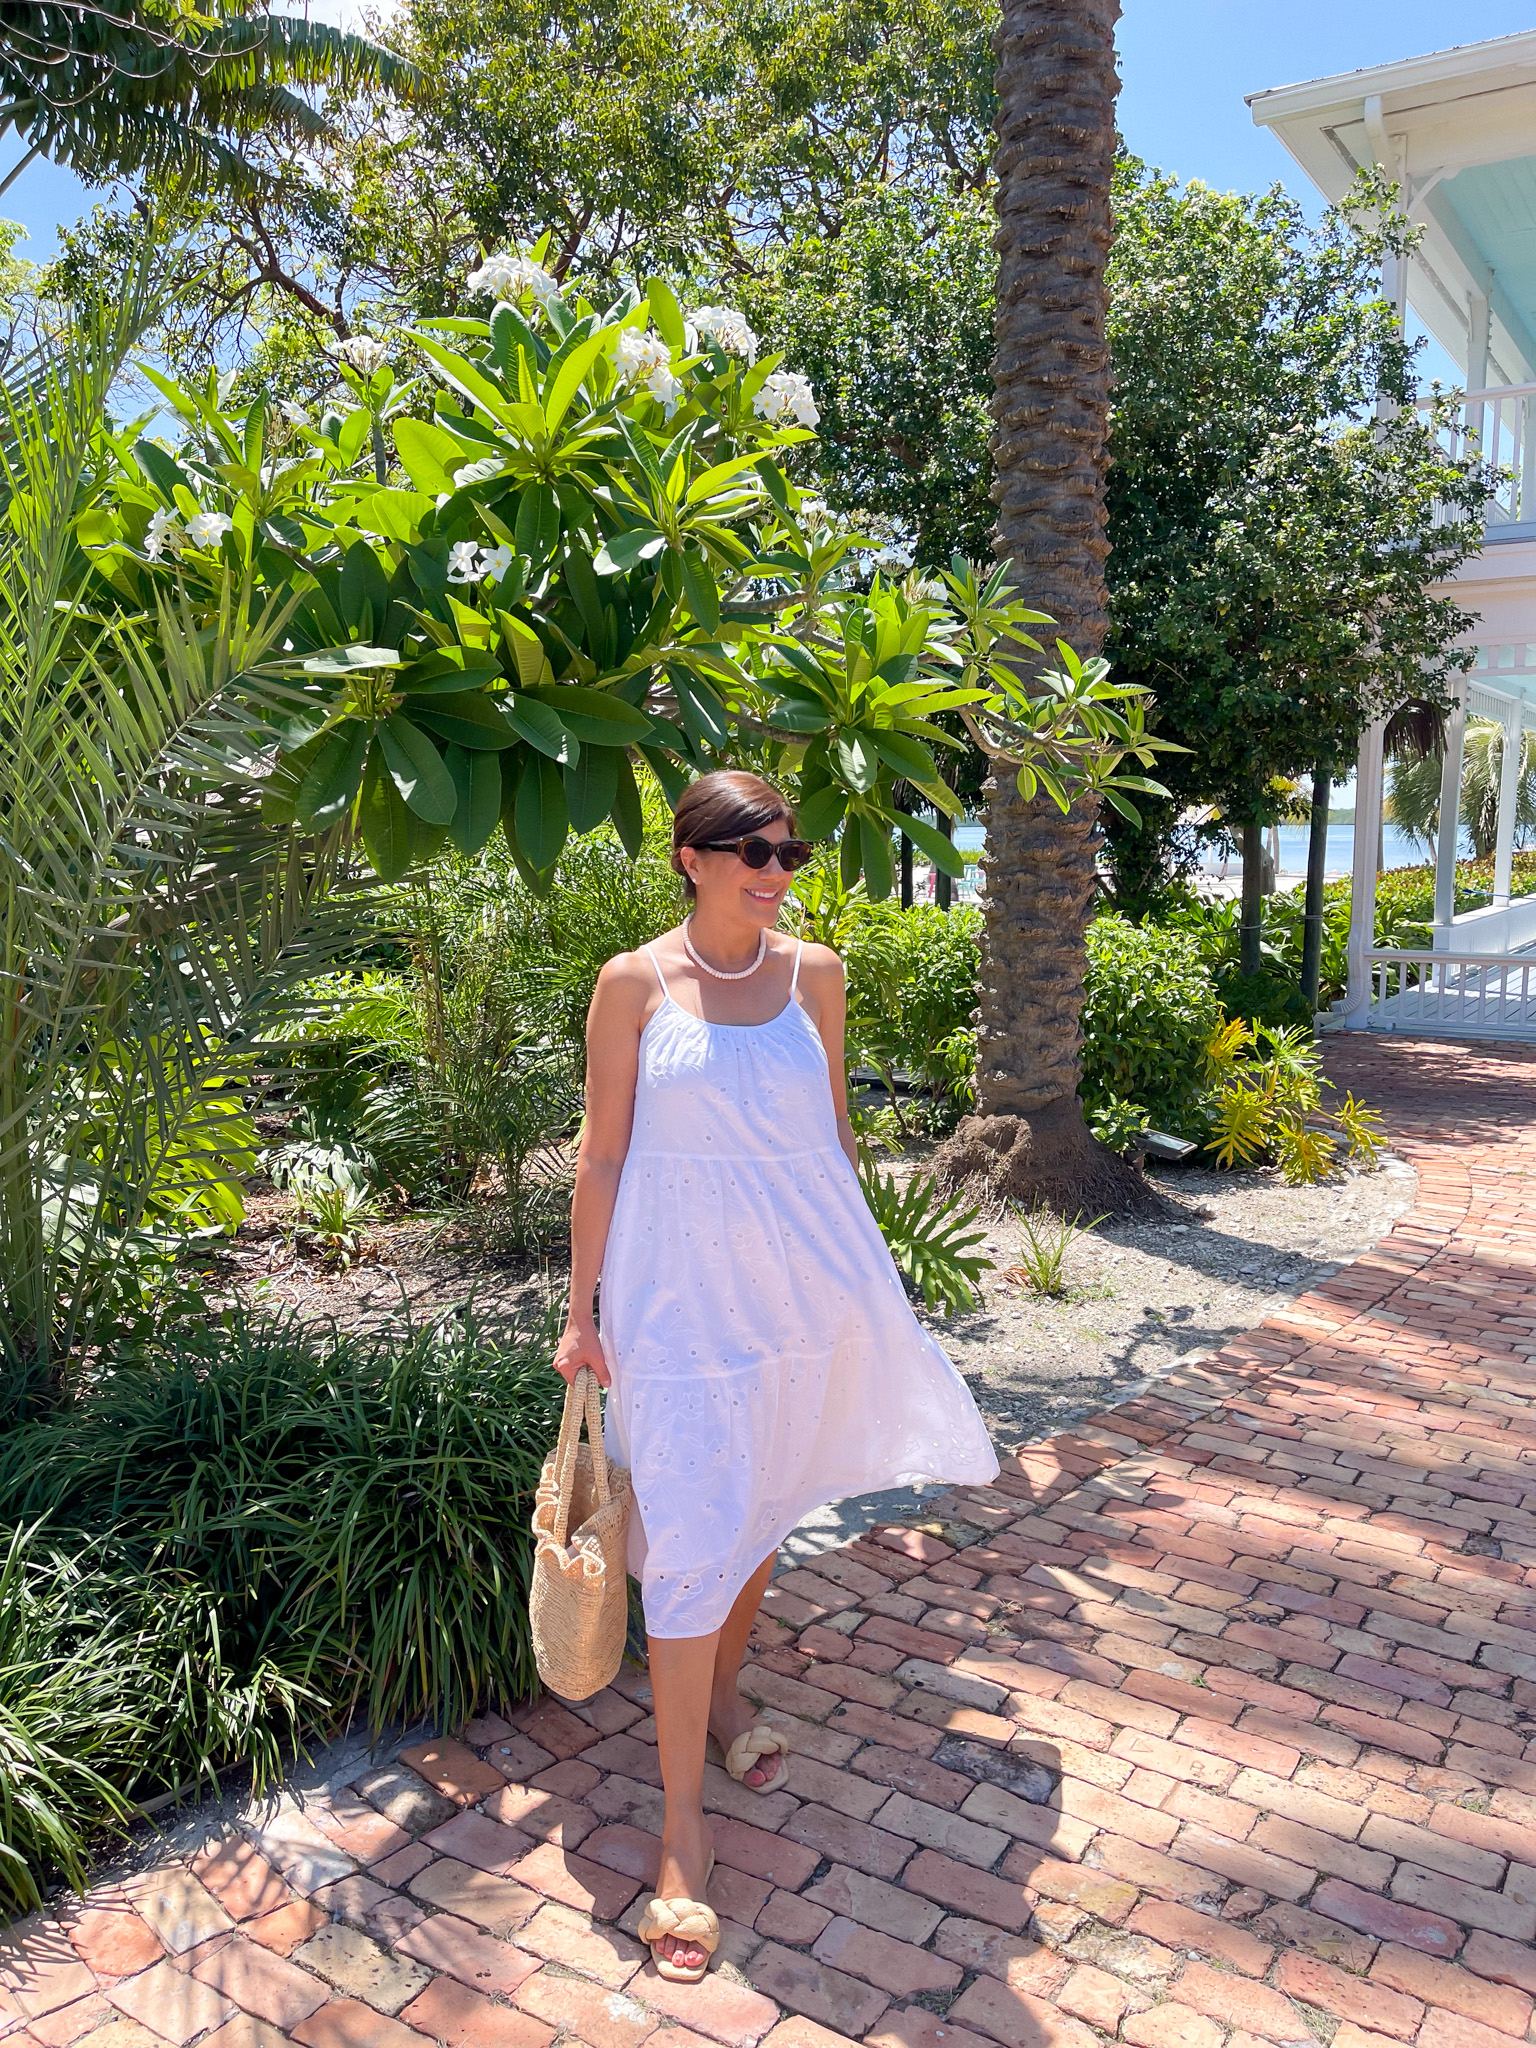 Desiree Leone of Beautifully Seaside features the prettiest breezy summer dresses that you can wear all season long, including this eyelet white dress from Target.